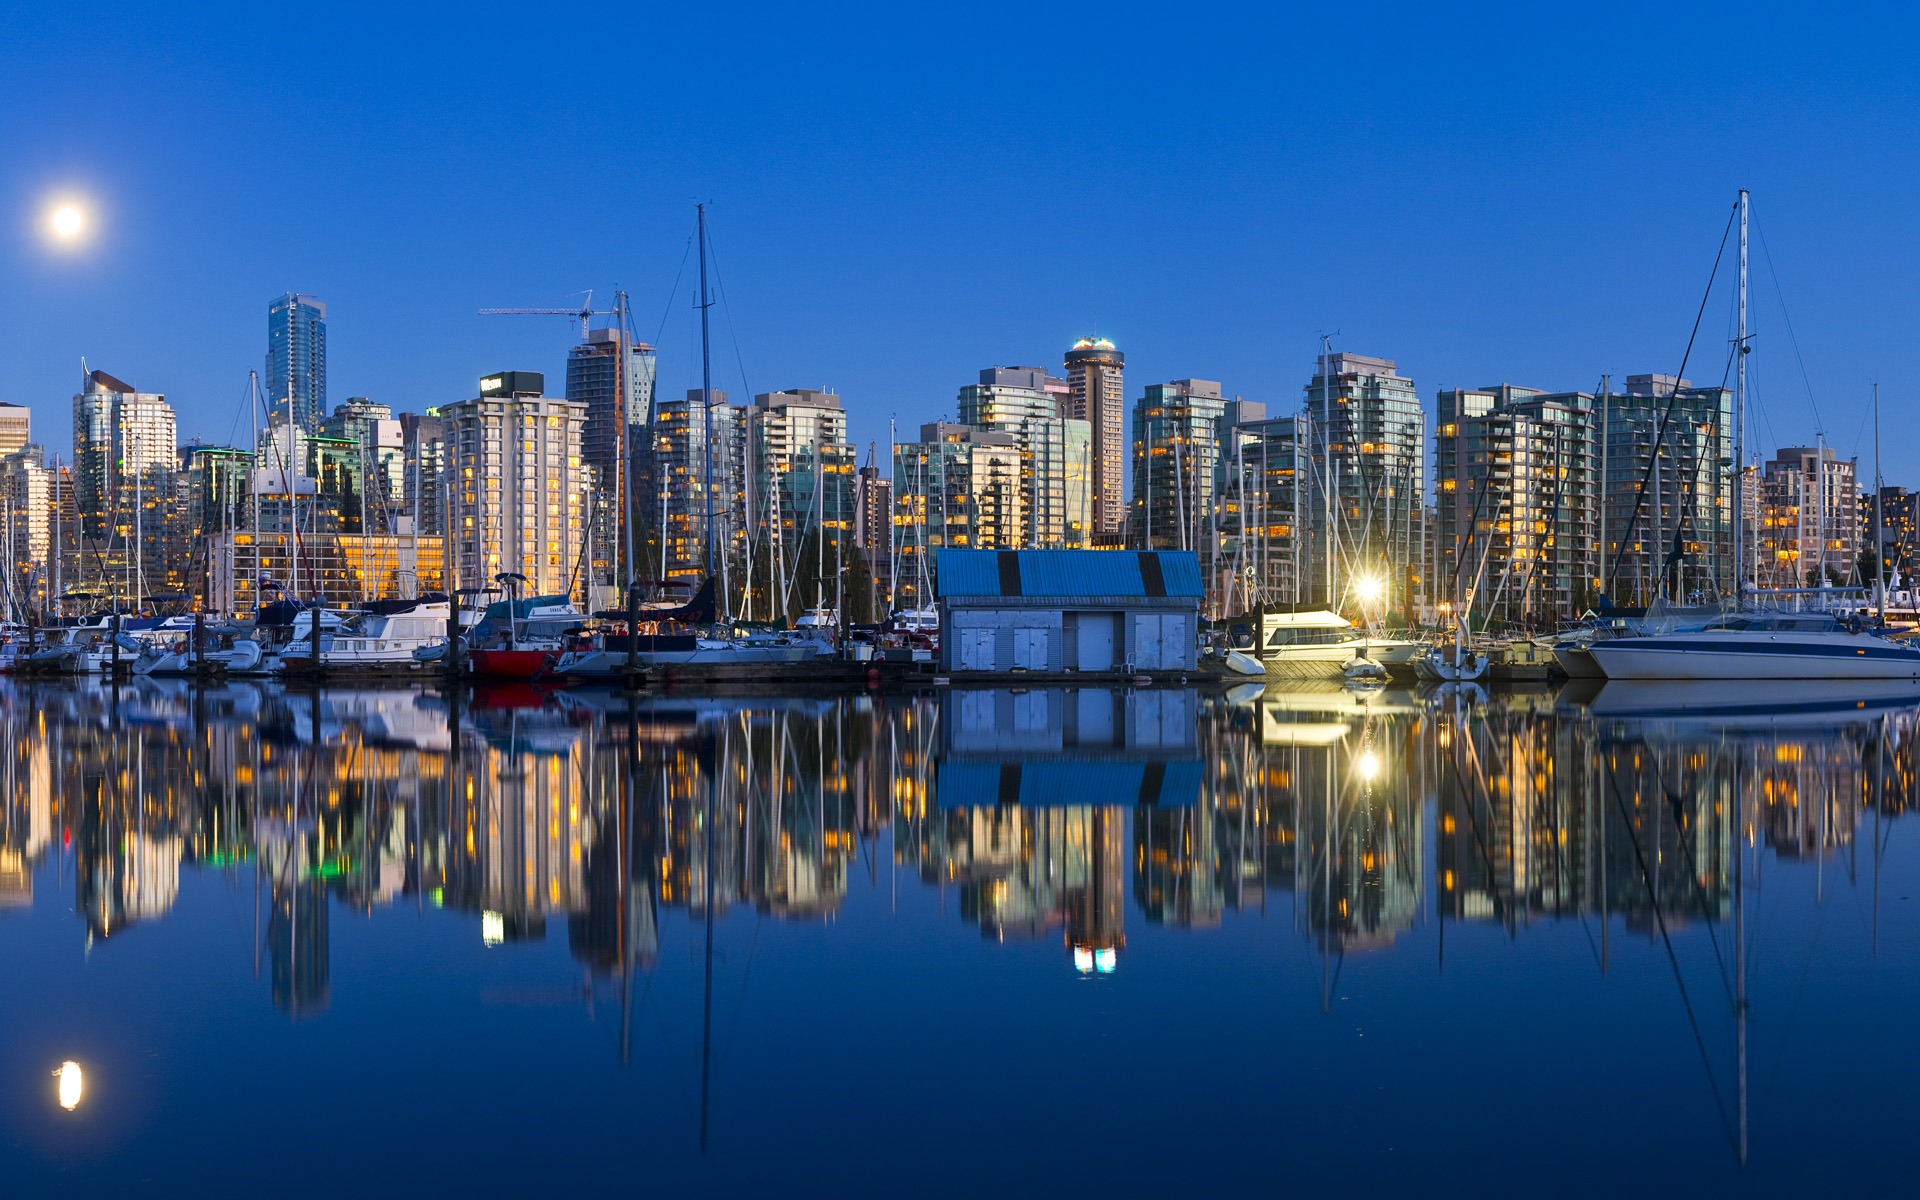 Windows 8 Official Panoramic Wallpaper, Cityscapes, - Cn Tower Hd - HD Wallpaper 